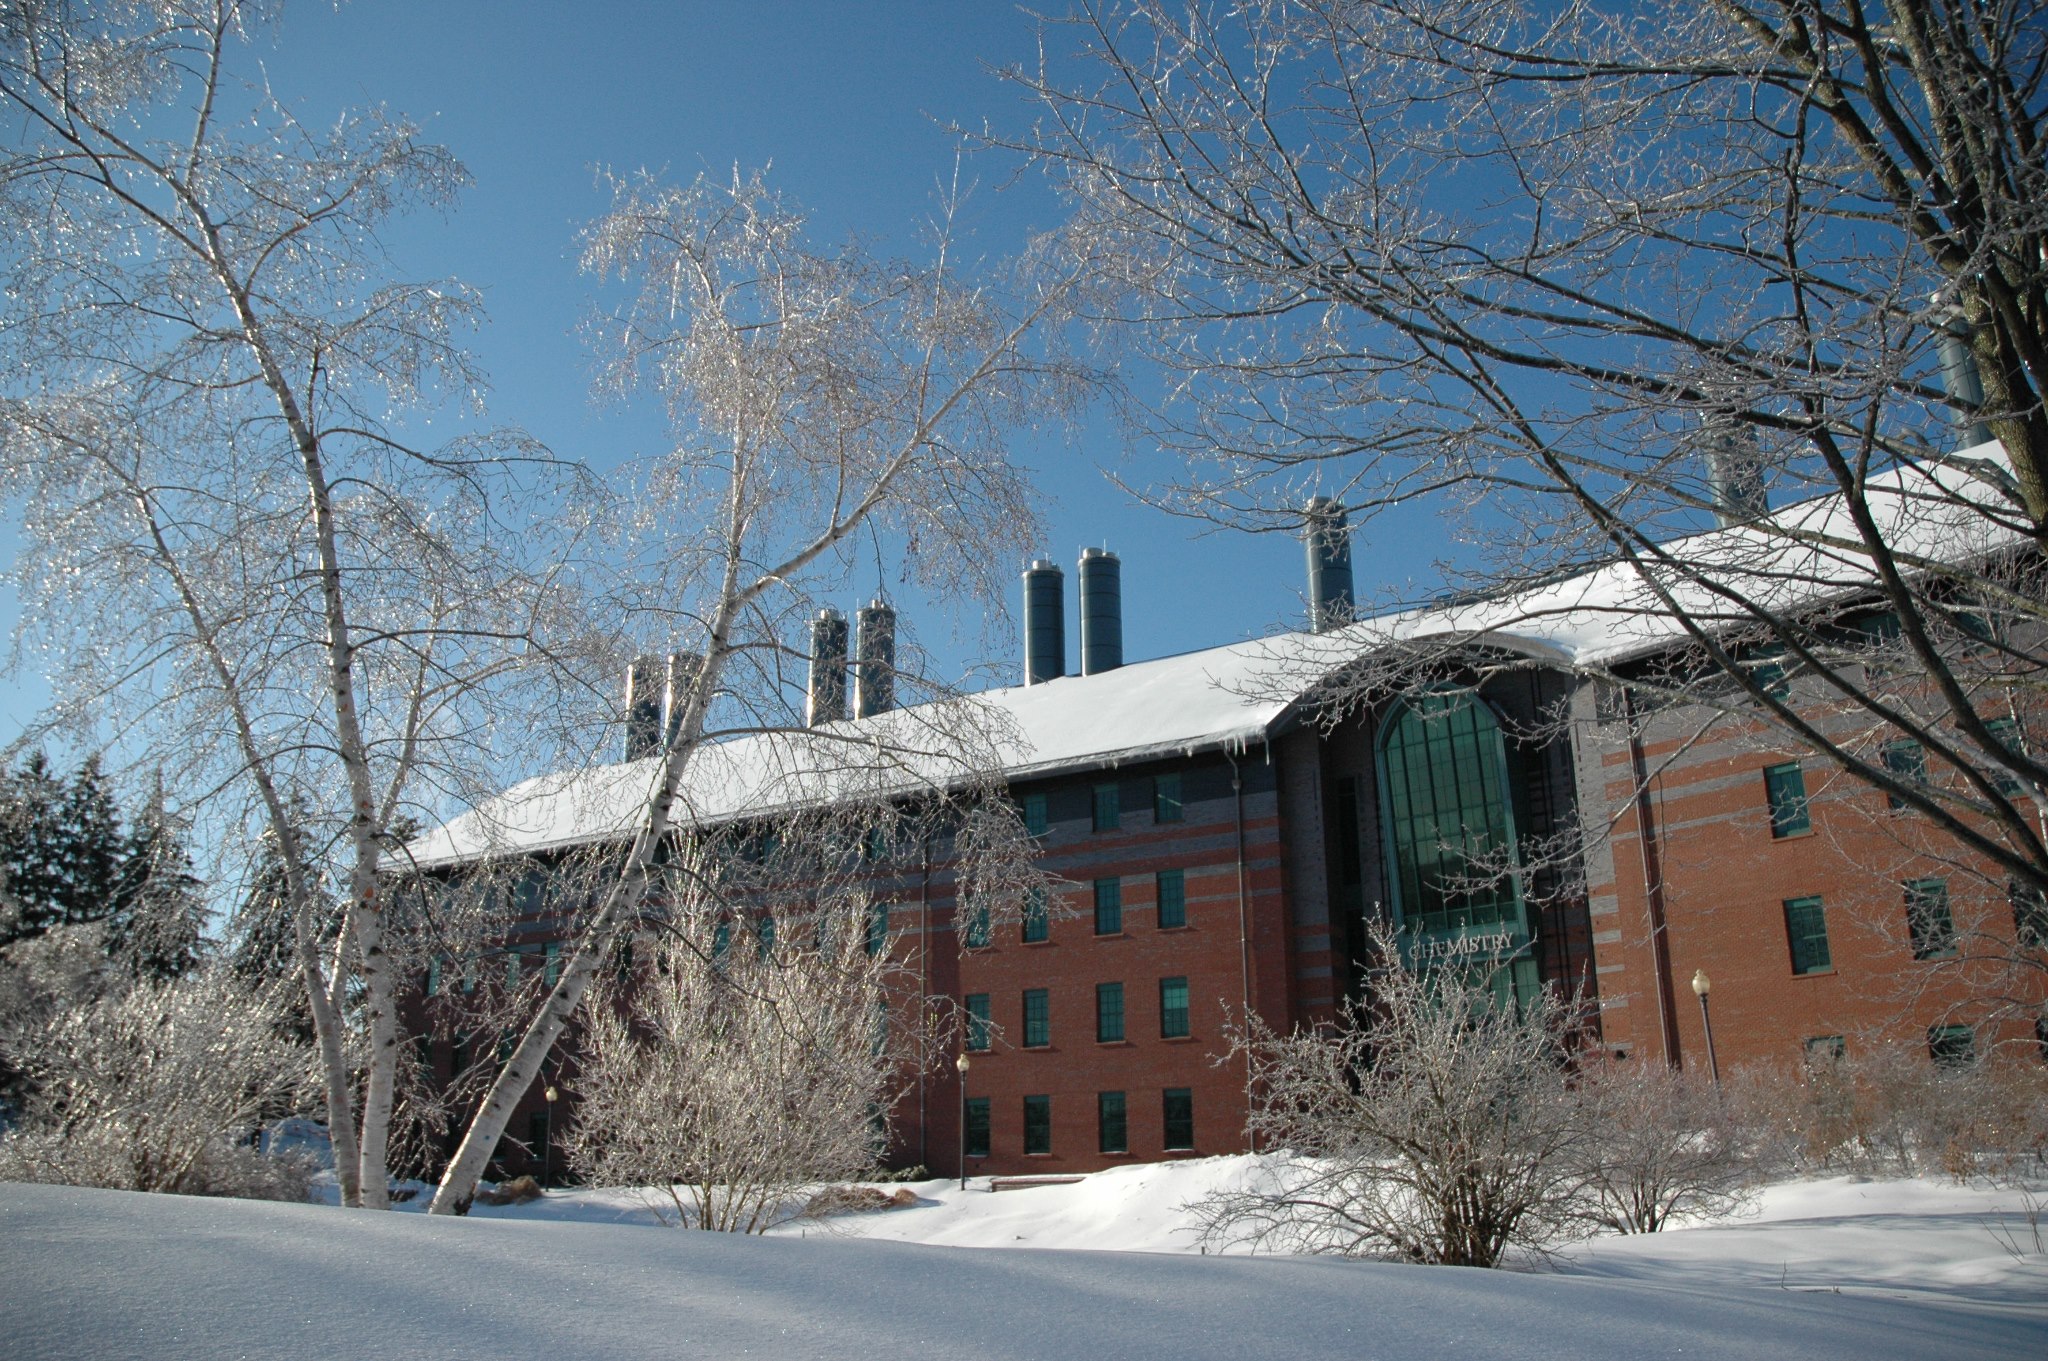 Chemistry Building in the winter